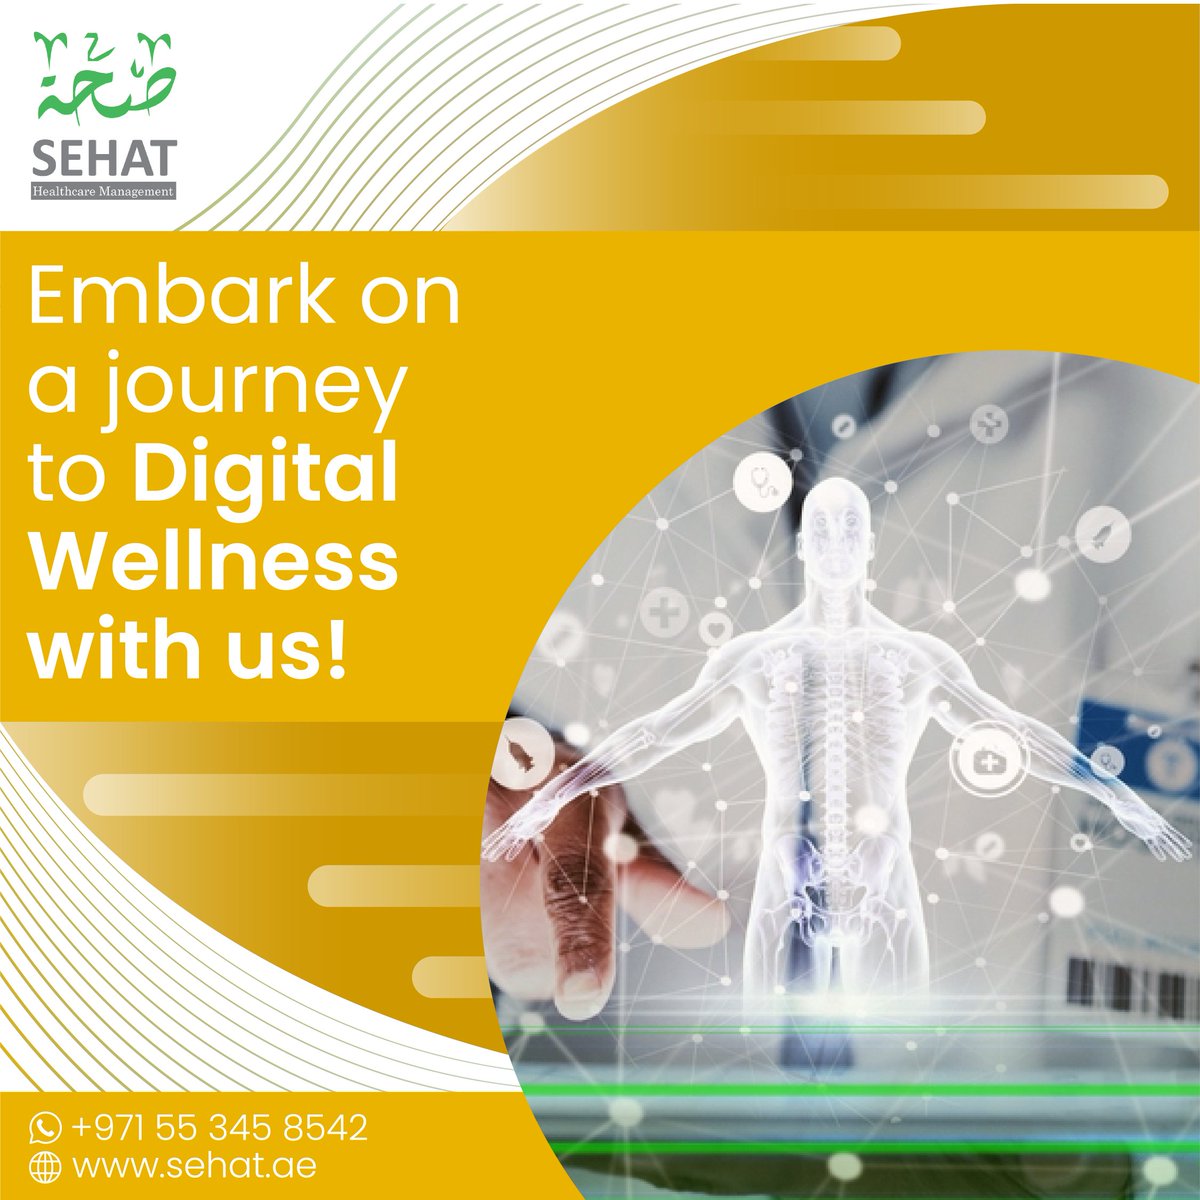 Embark on a journey to Digital Wellness with us.
✅ Graphic Design
✅ Web Development
✅ Digital Marketing

All covered to make YOUR HEALTHCARE BRAND outshine your competitors. 

#brandingdesigns #healthcaremarketing #seostrategy #growyourbrand #healthcaremanagement #webdesign